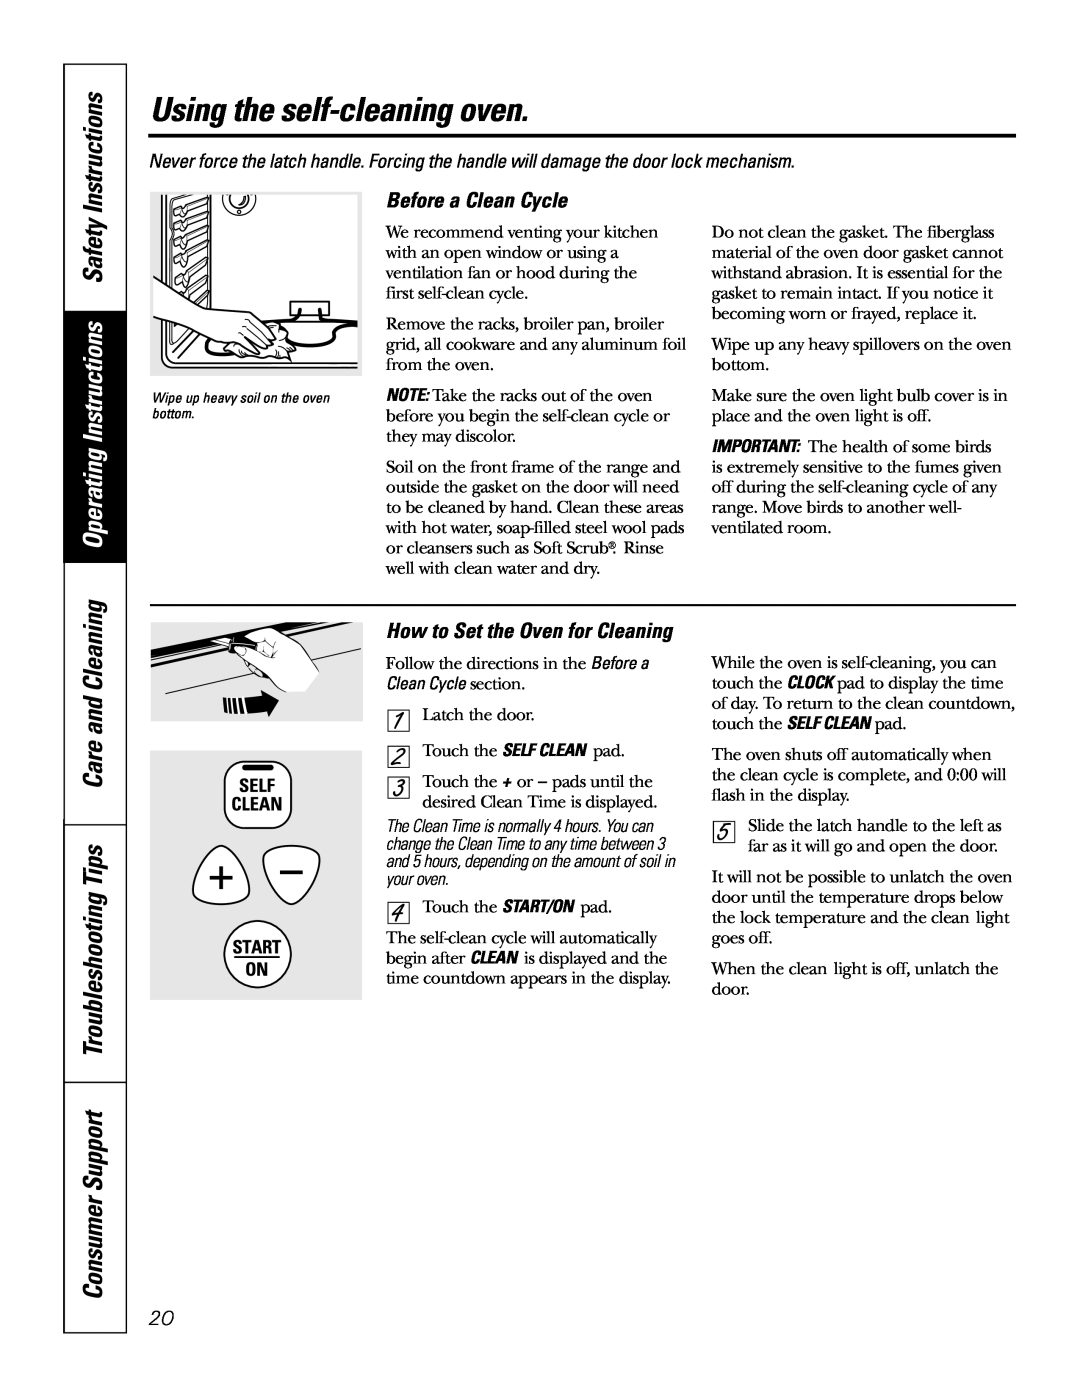 GE JGSP28 owner manual Using the self-cleaningoven, Operating Instructions Safety, Before a Clean Cycle 